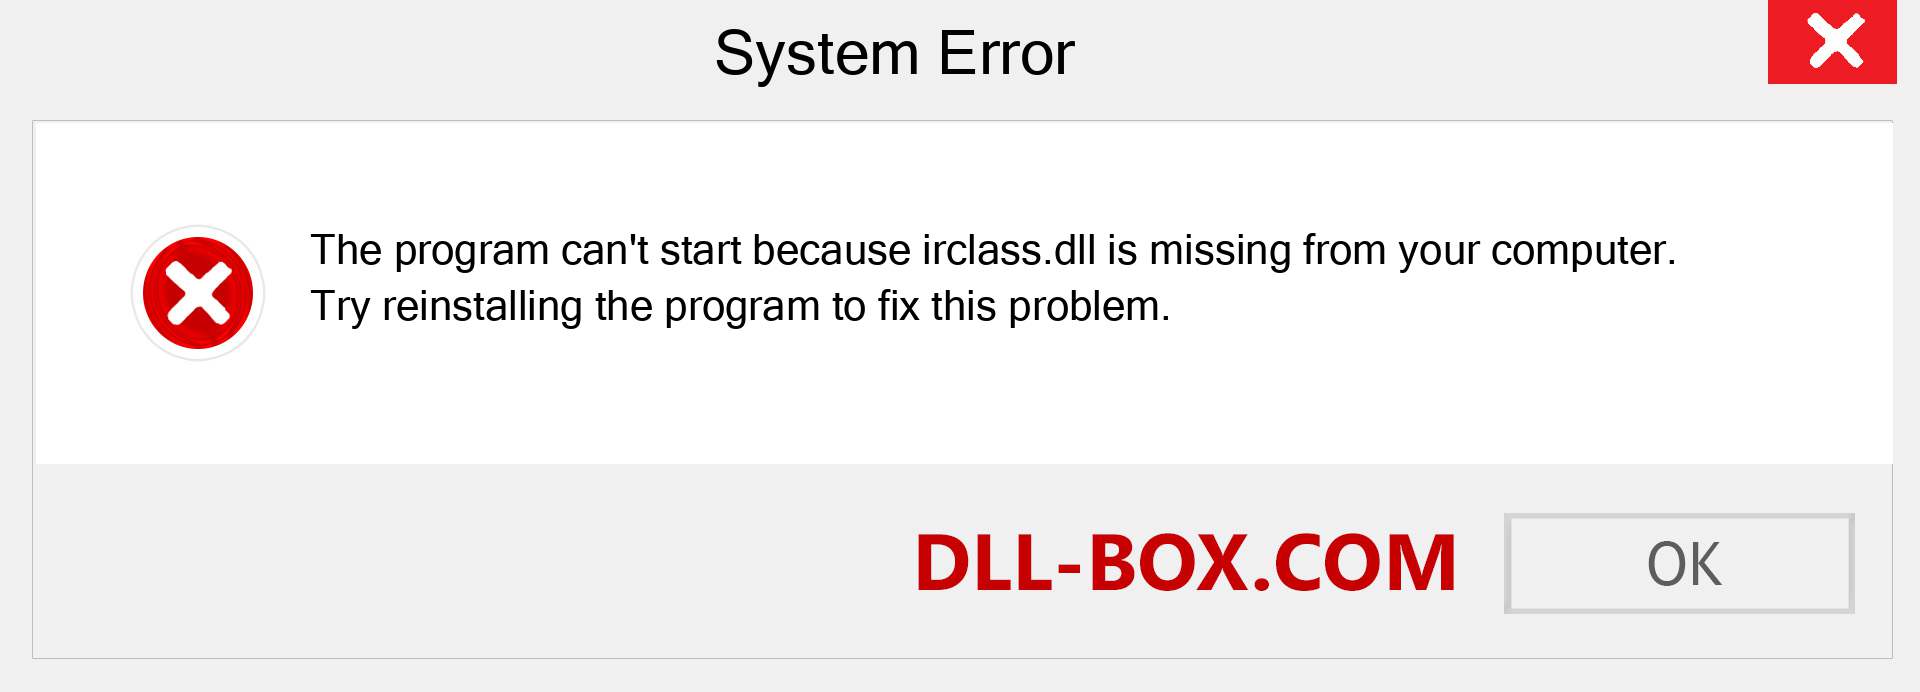  irclass.dll file is missing?. Download for Windows 7, 8, 10 - Fix  irclass dll Missing Error on Windows, photos, images